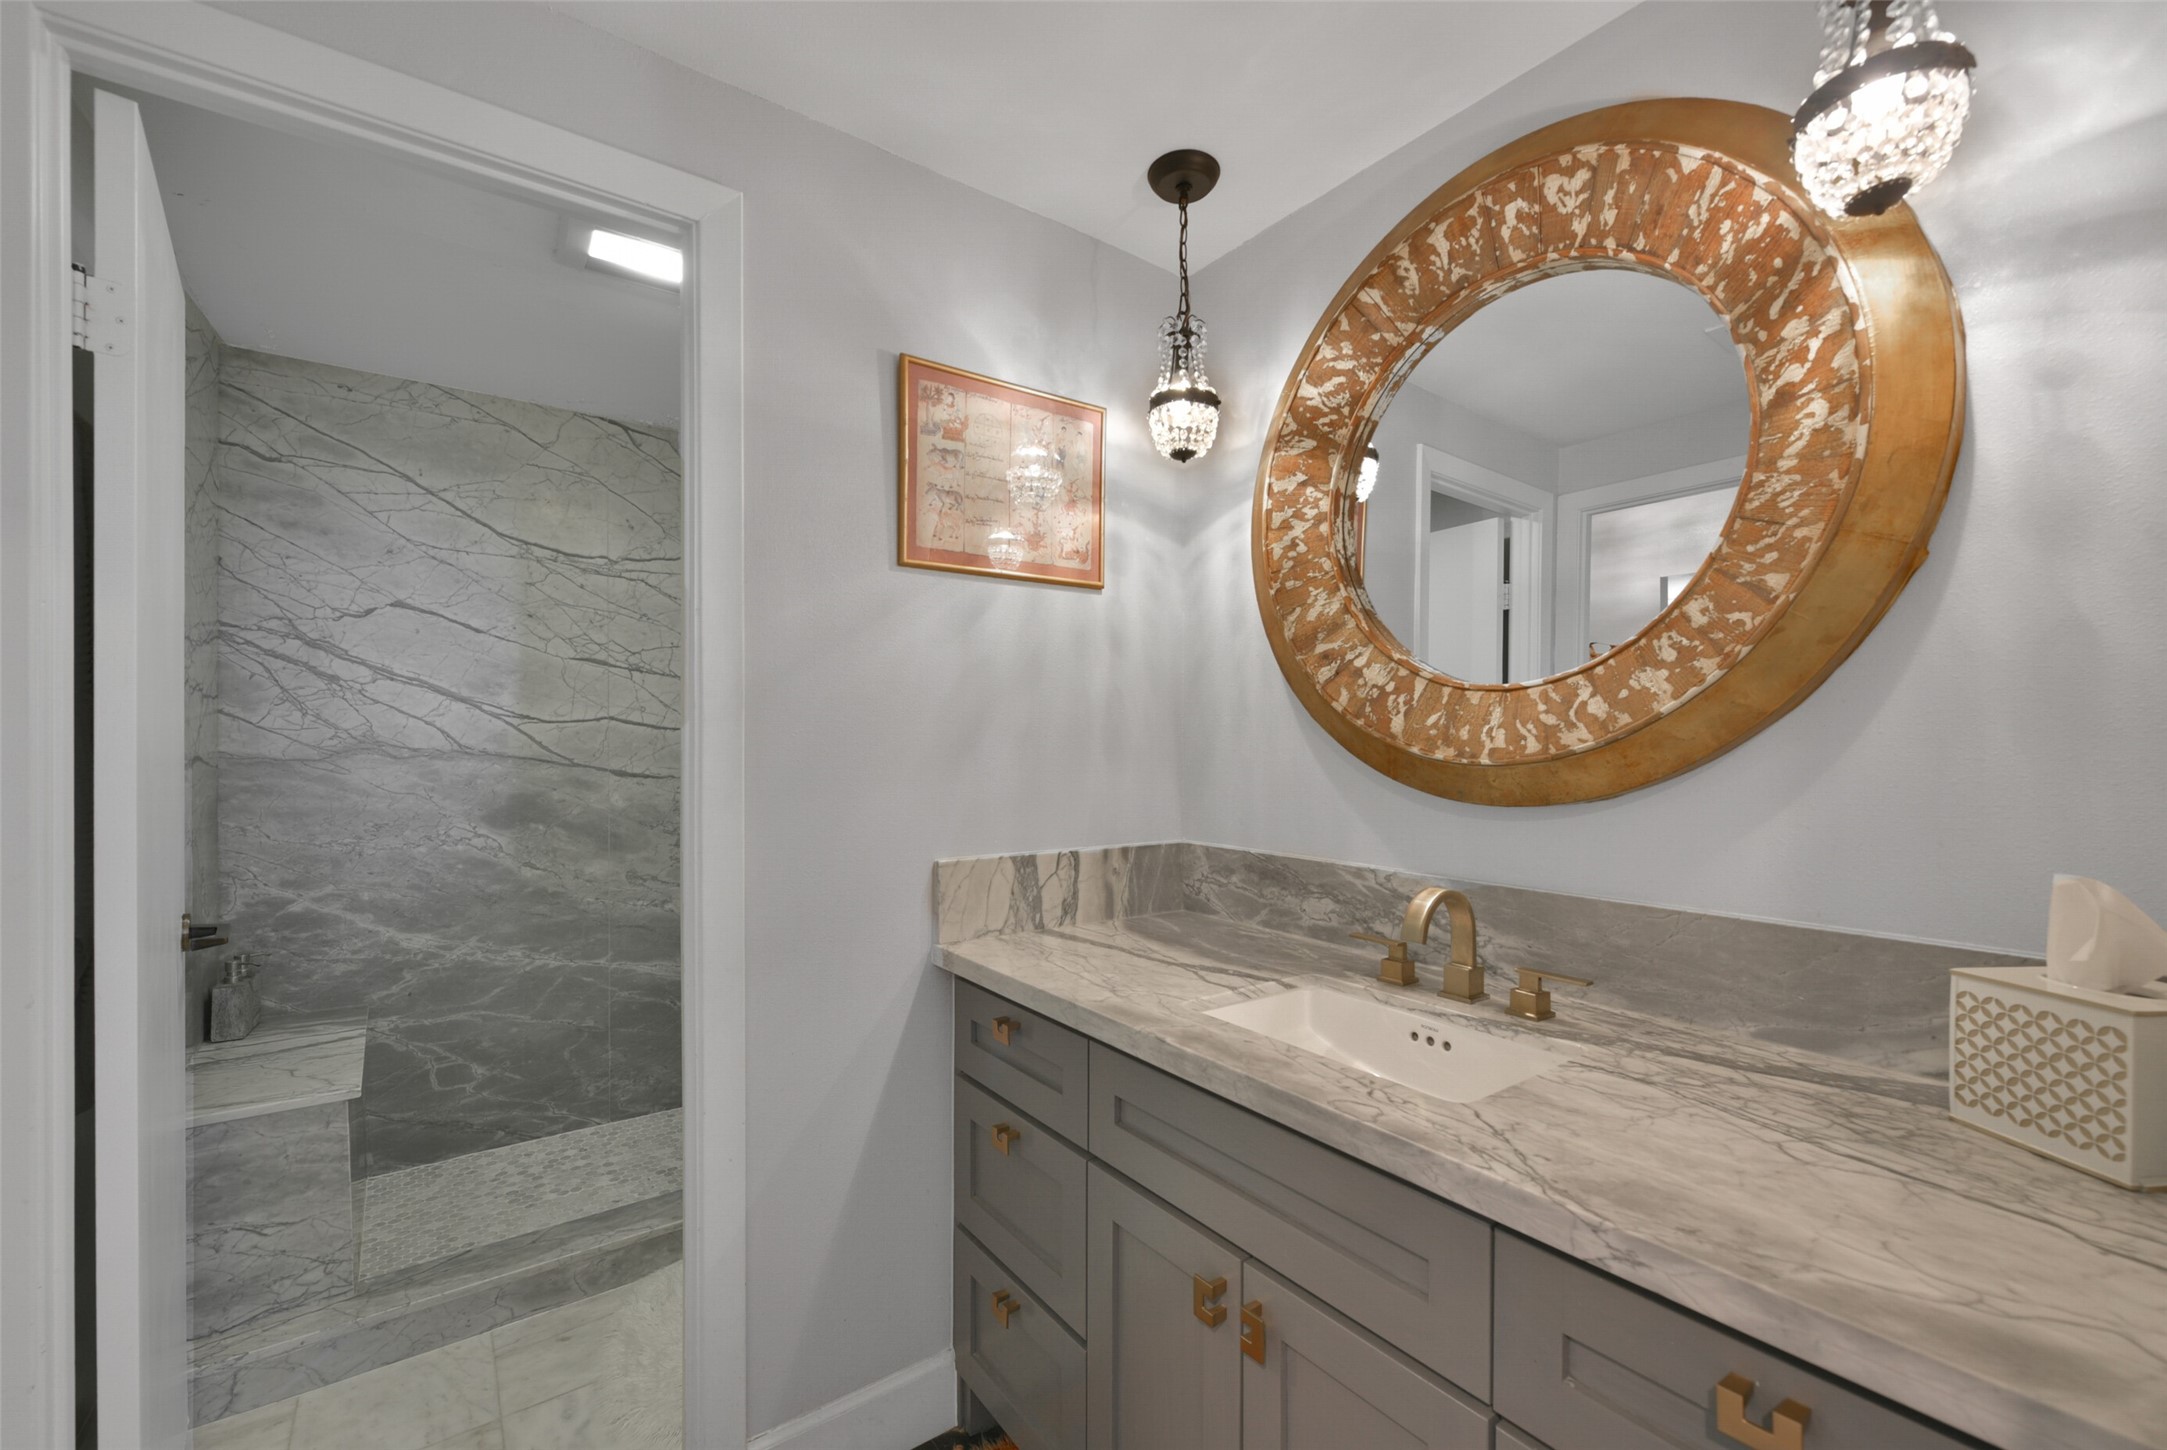 Luxurious secondary bath with custom marble vanity, brass fixtures/hardware, decorative mirror, pendant lighting and large marble shower with bench seat.